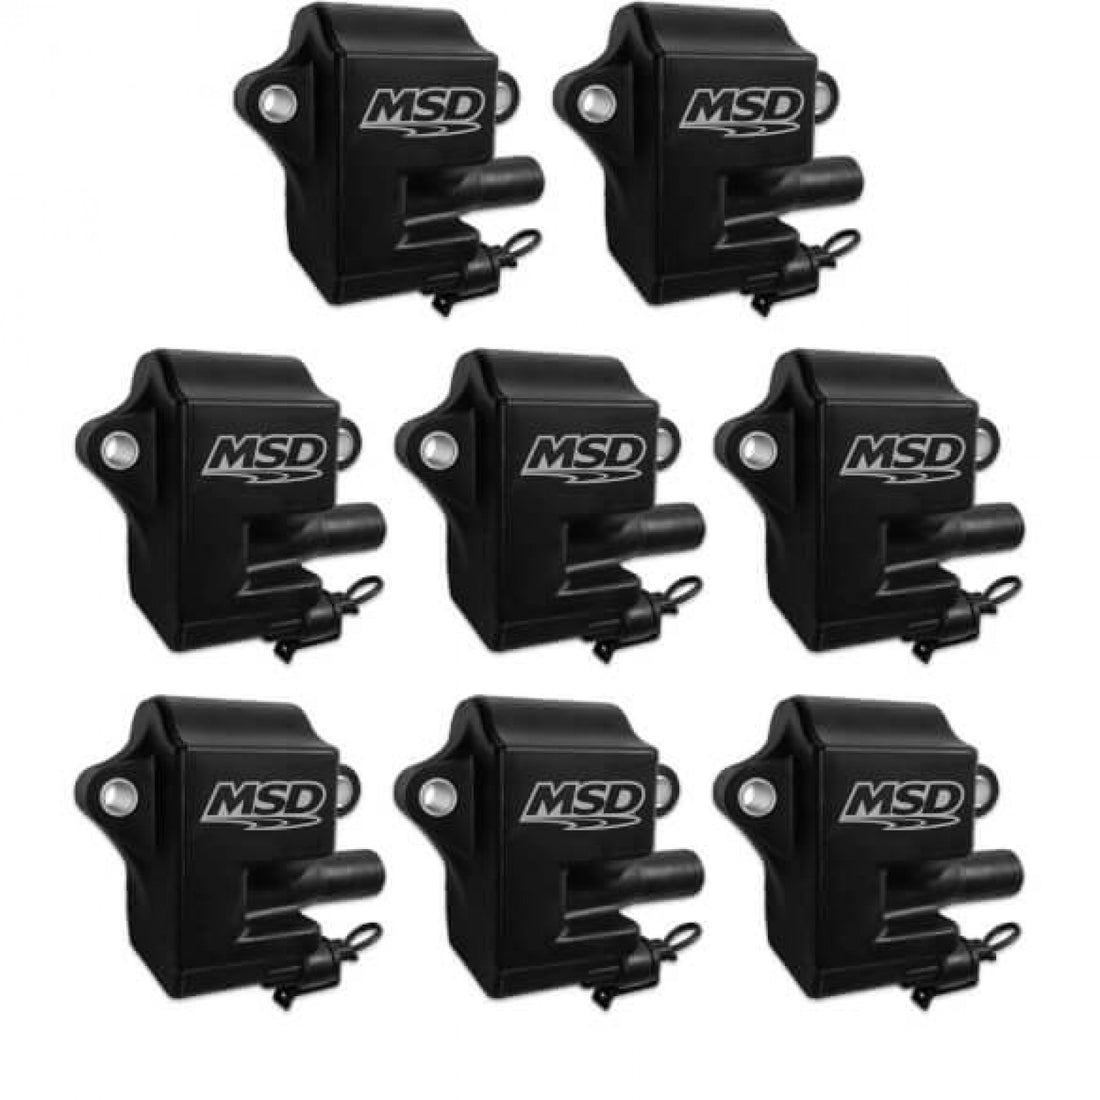 MSD Ignition Coil - Pro Power Series - GM LS1/LS6 Engines - Black - 8-Pack